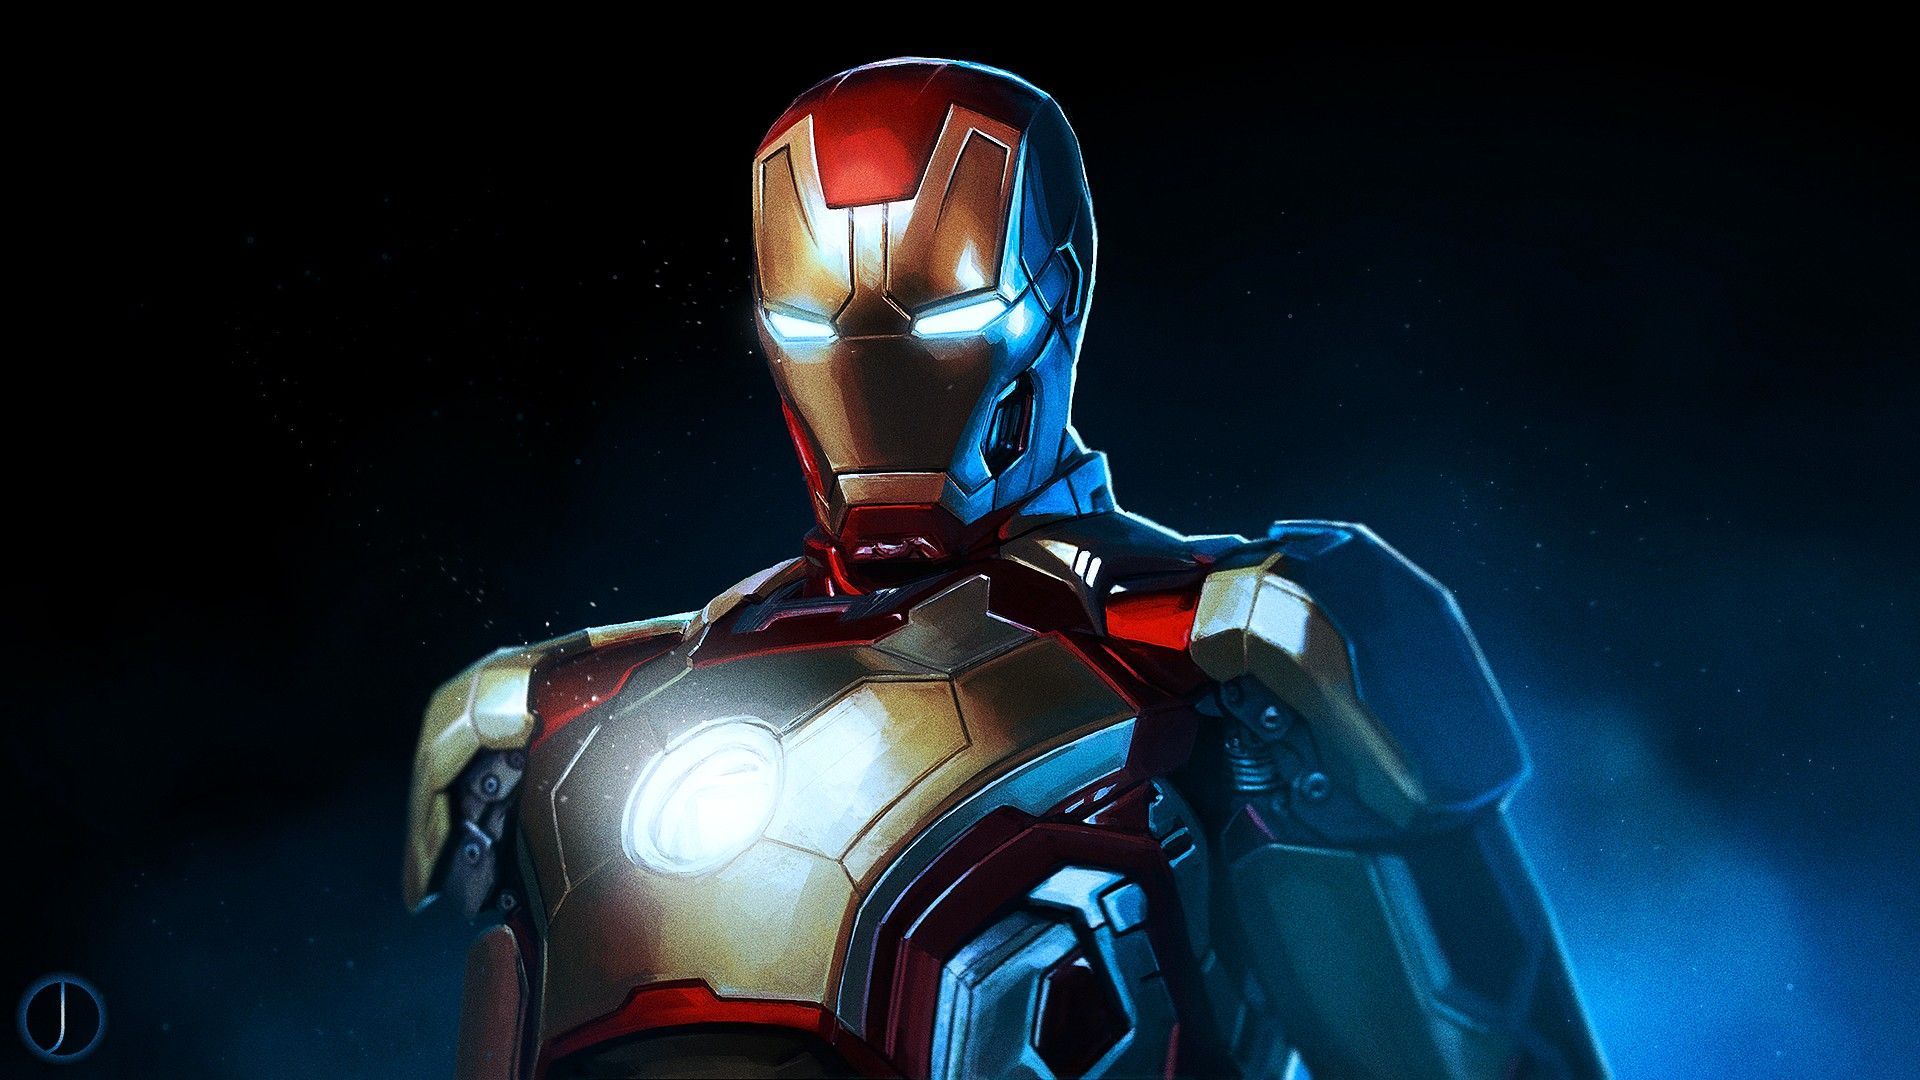 Iron man 3 wallpapers HD Wallpapers, Backgrounds, Images, Art